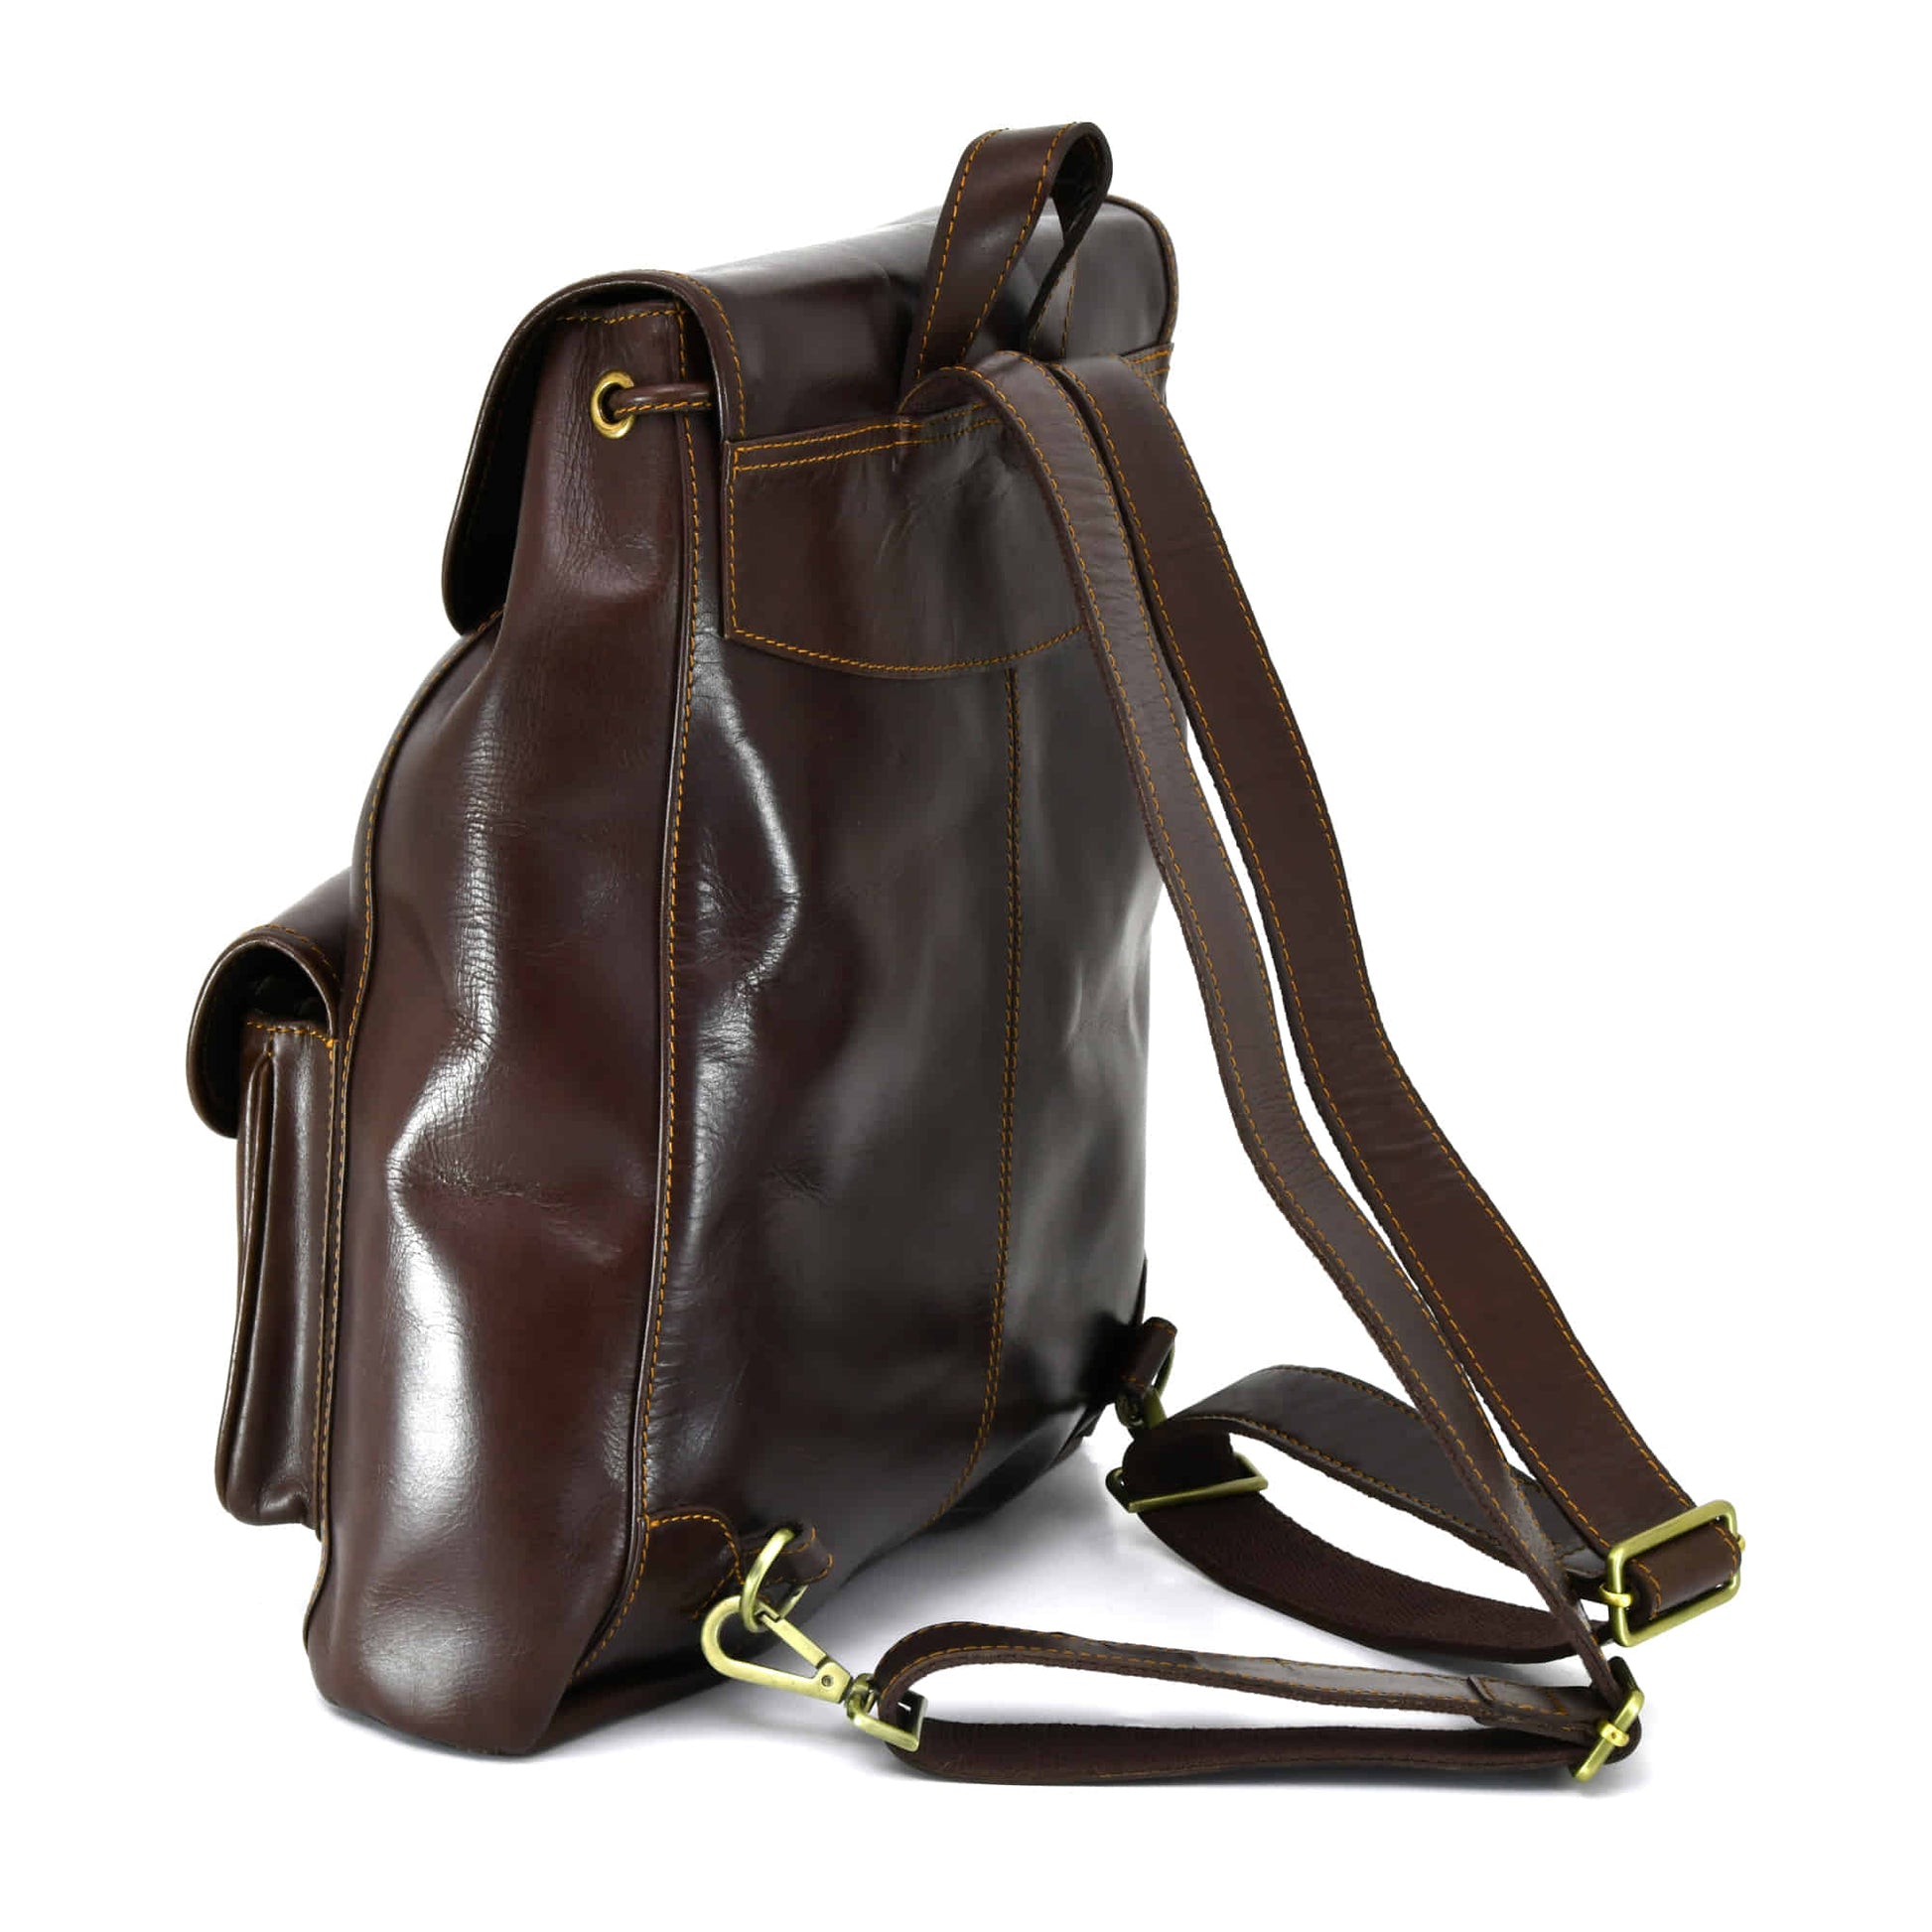 Style n Craft 392151 Backpack in Full Grain Dark Brown Leather, Medium Size - Back Angled View Showing the Adjustable Shoulder Straps & the Leather Hand Carry Strap